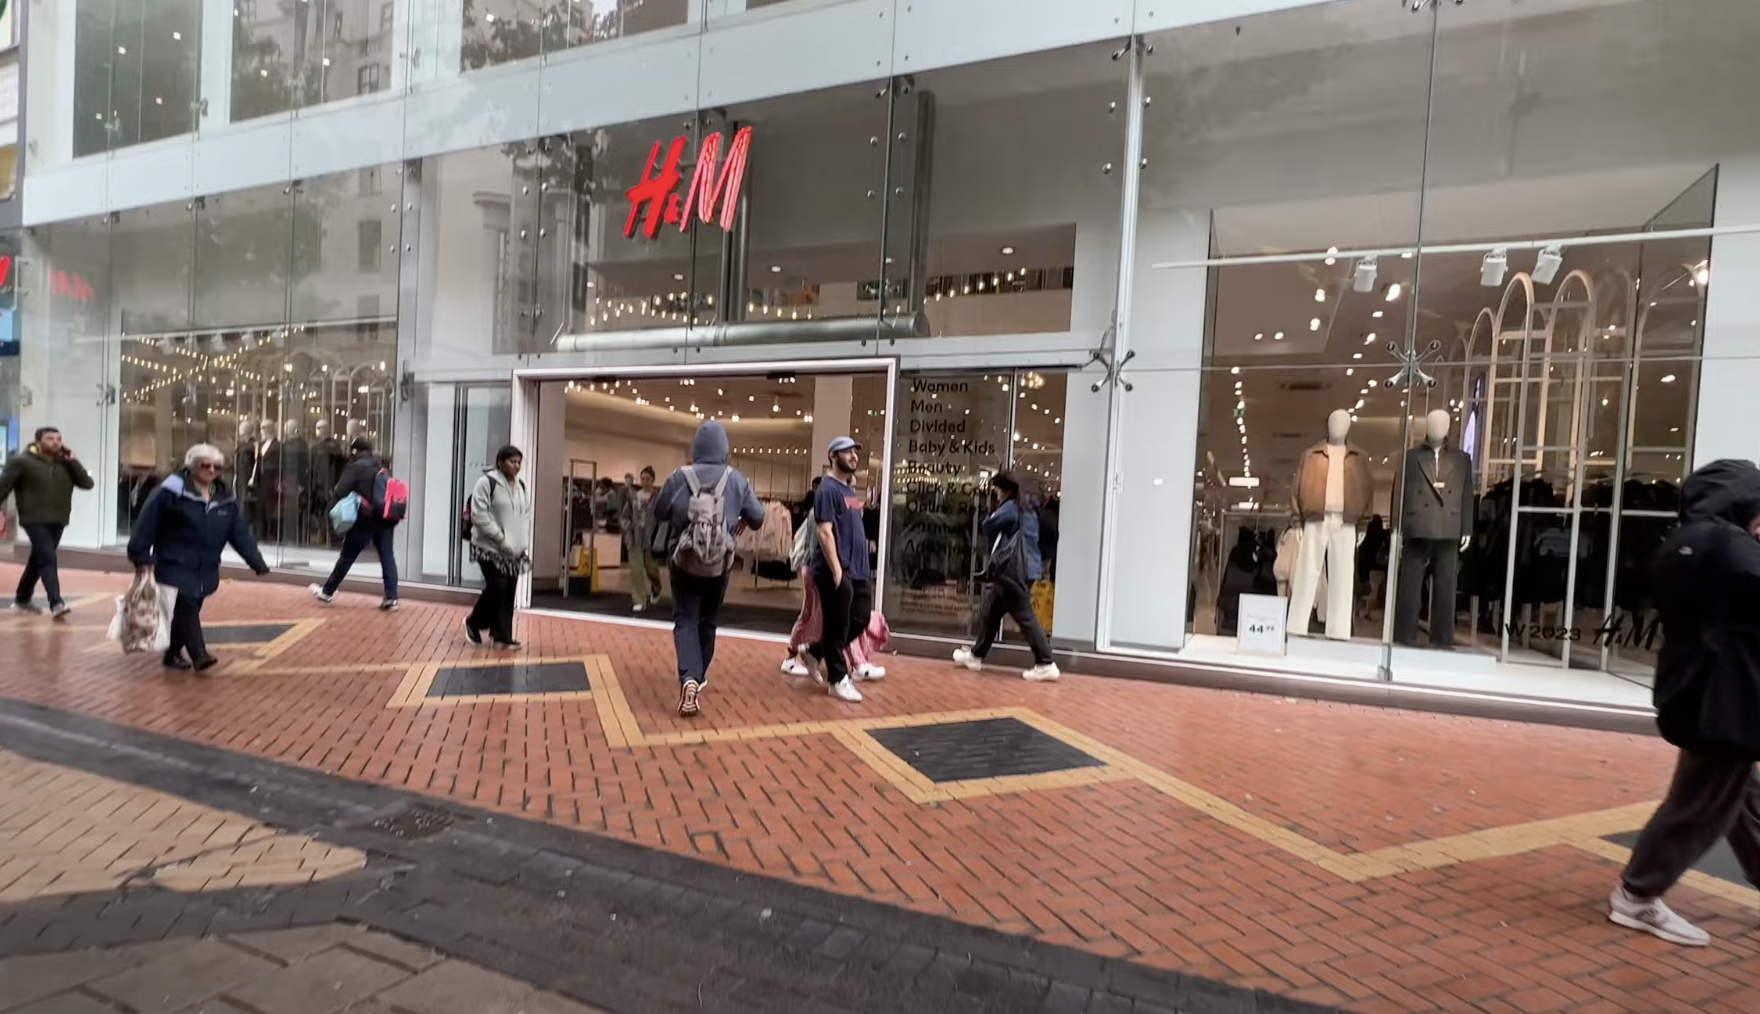 h&m store front